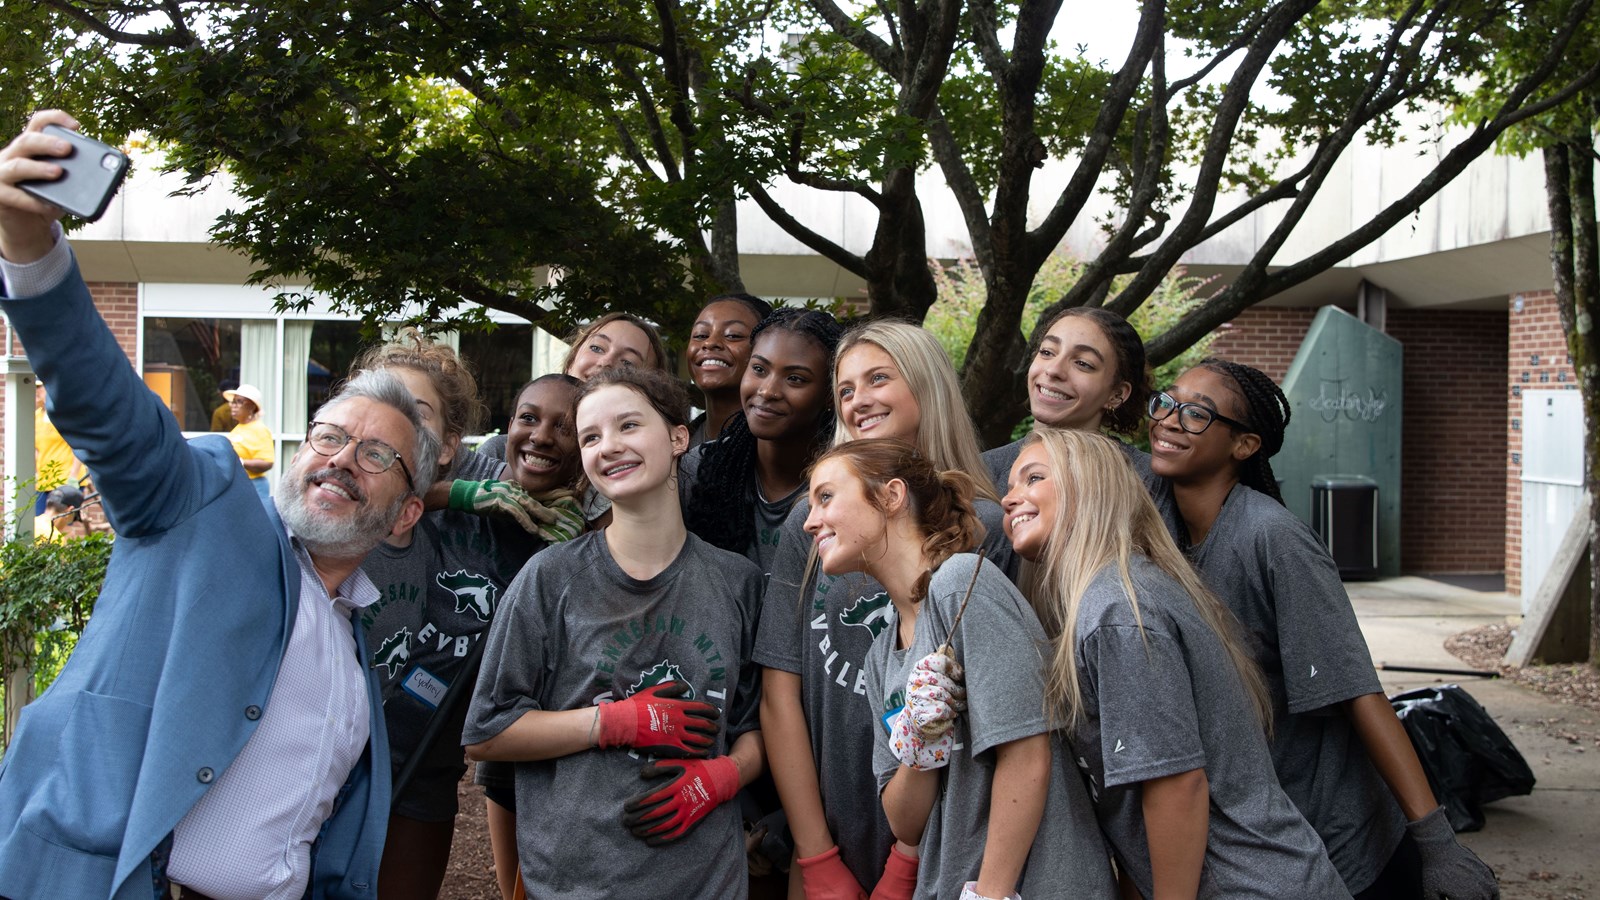 Principal David poses with members of the Kennesaw Mountain High School Volleyball team while they are volunteering at Pine Mountain Middle School to refresh the school's garden space.